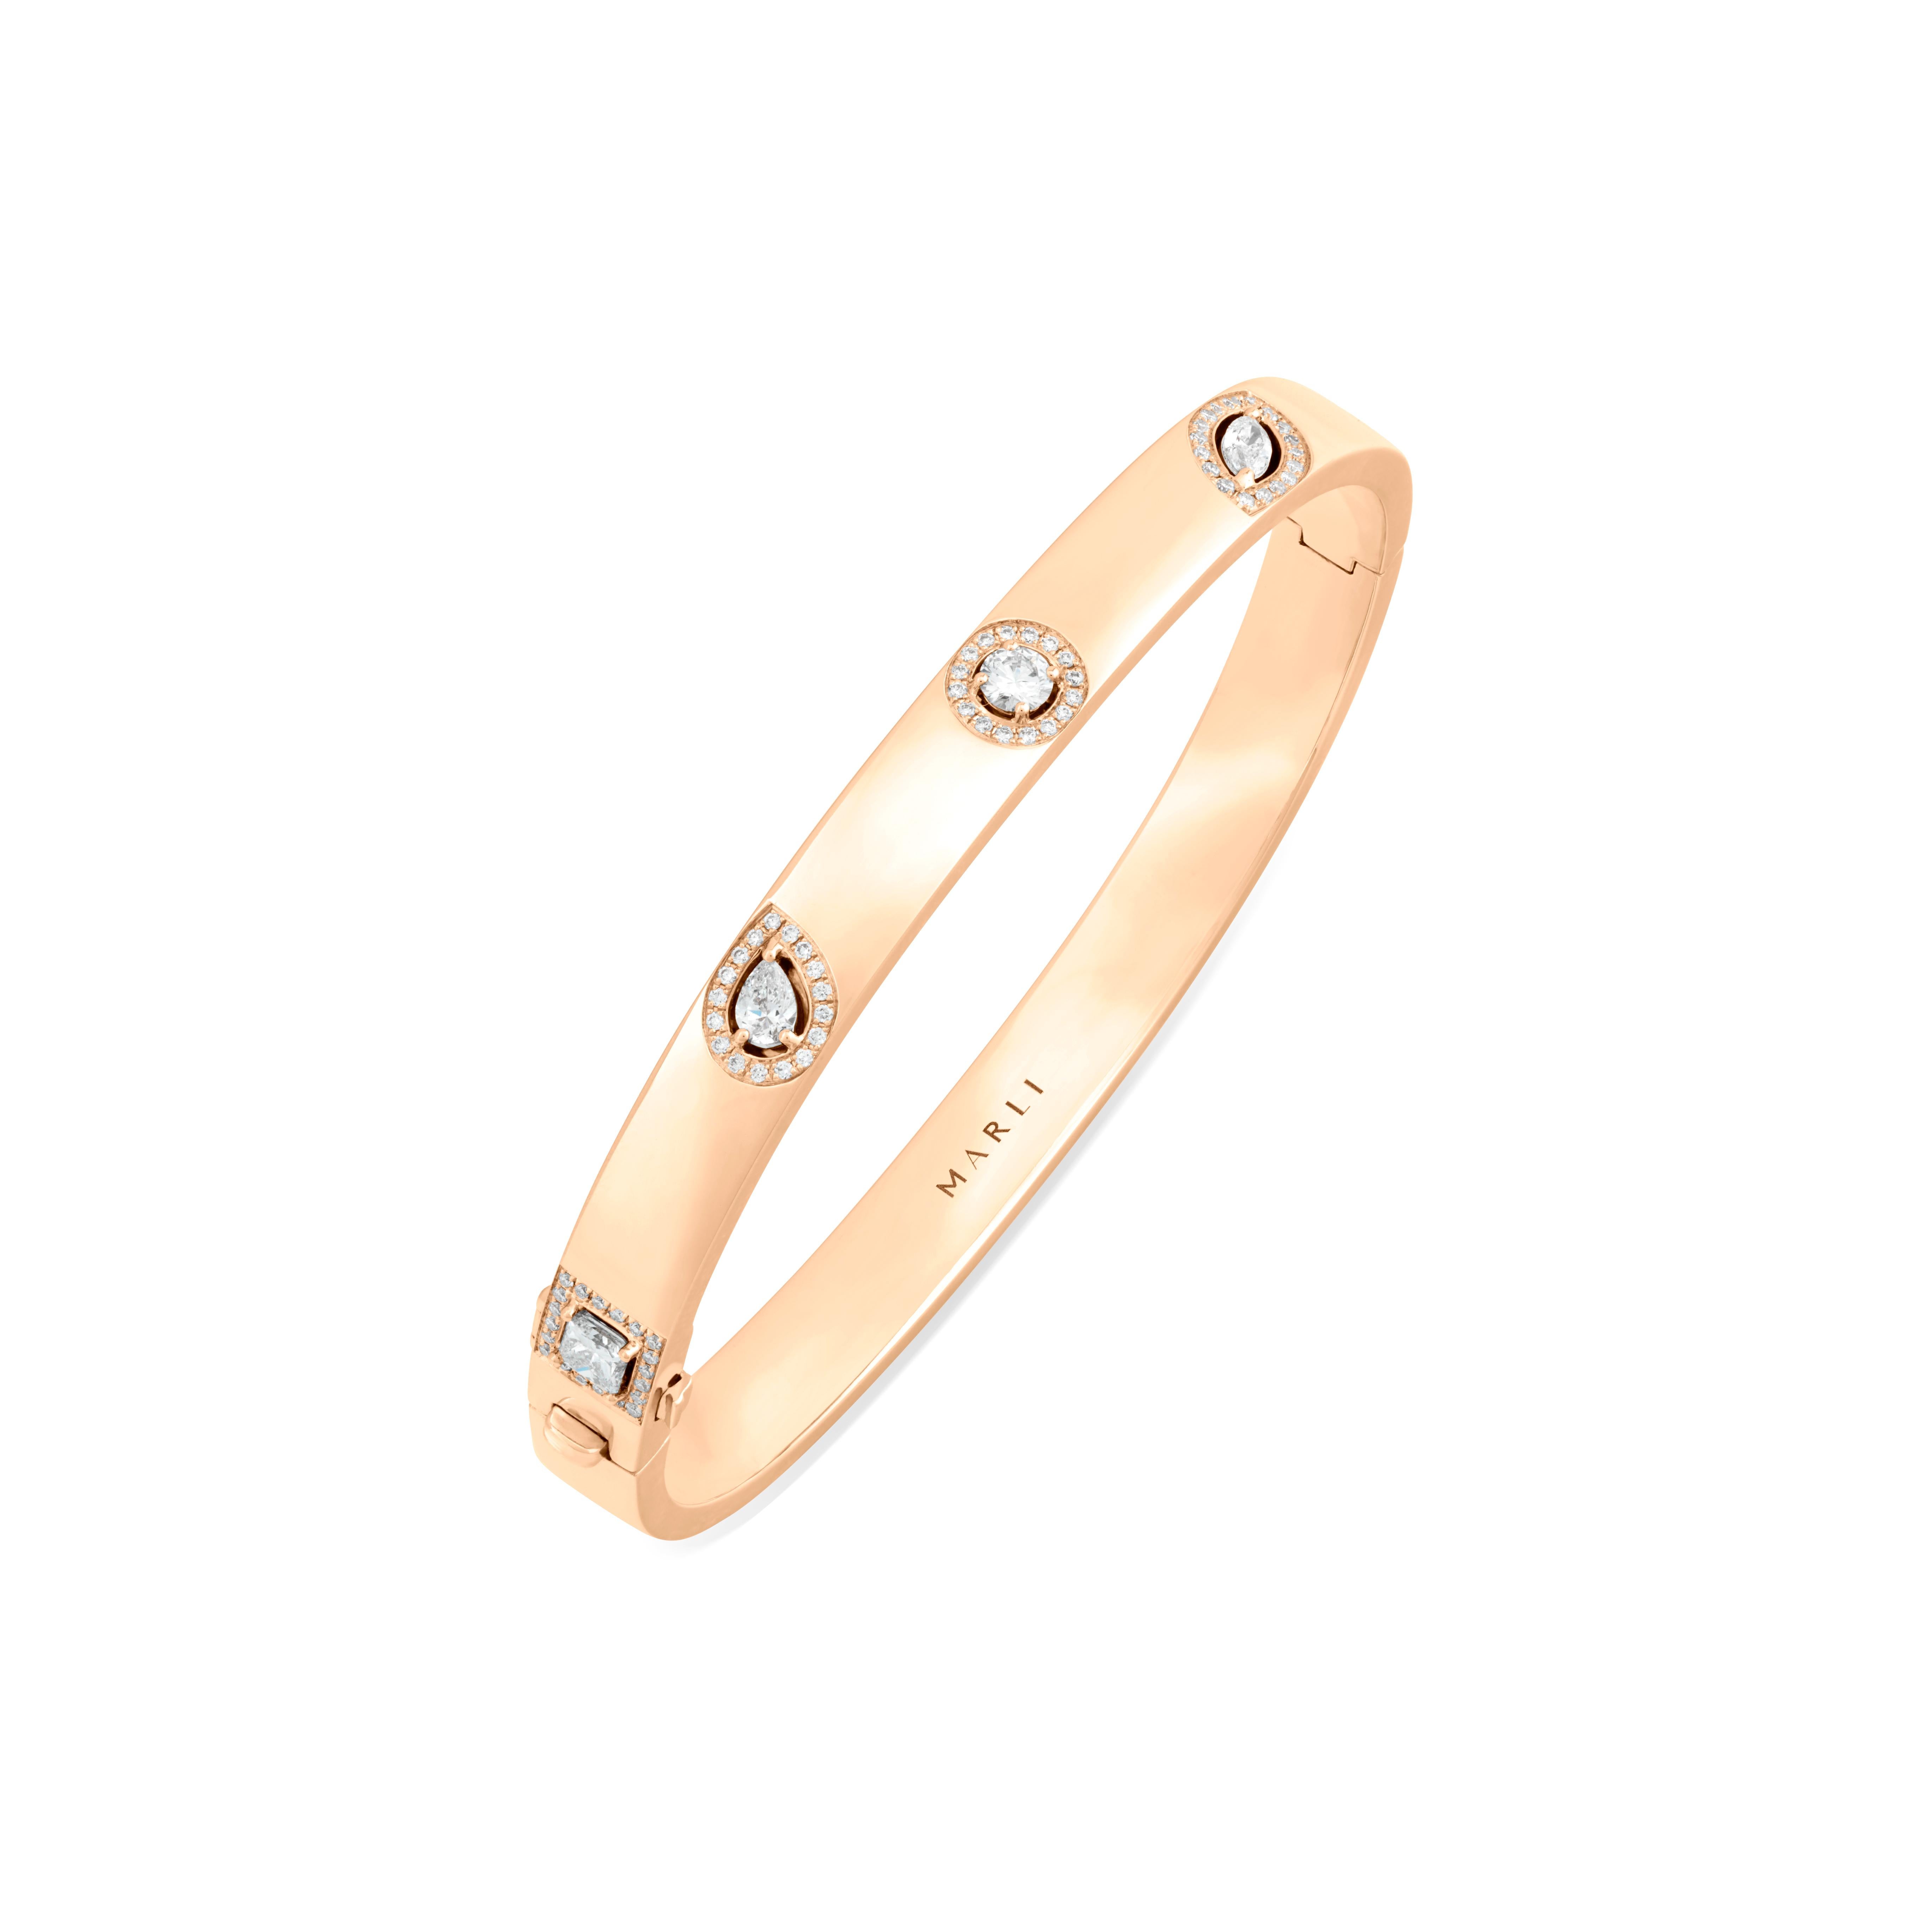 Sugar crystallized onto a string, like candy an assortment of  diamonds in various shapes. Vintage gems re-imagined as  sassy luxury treats.
Relish the remarkable flavor of wonder. The sweet and sassy Rock Hinged Bangle is available in 18K white,